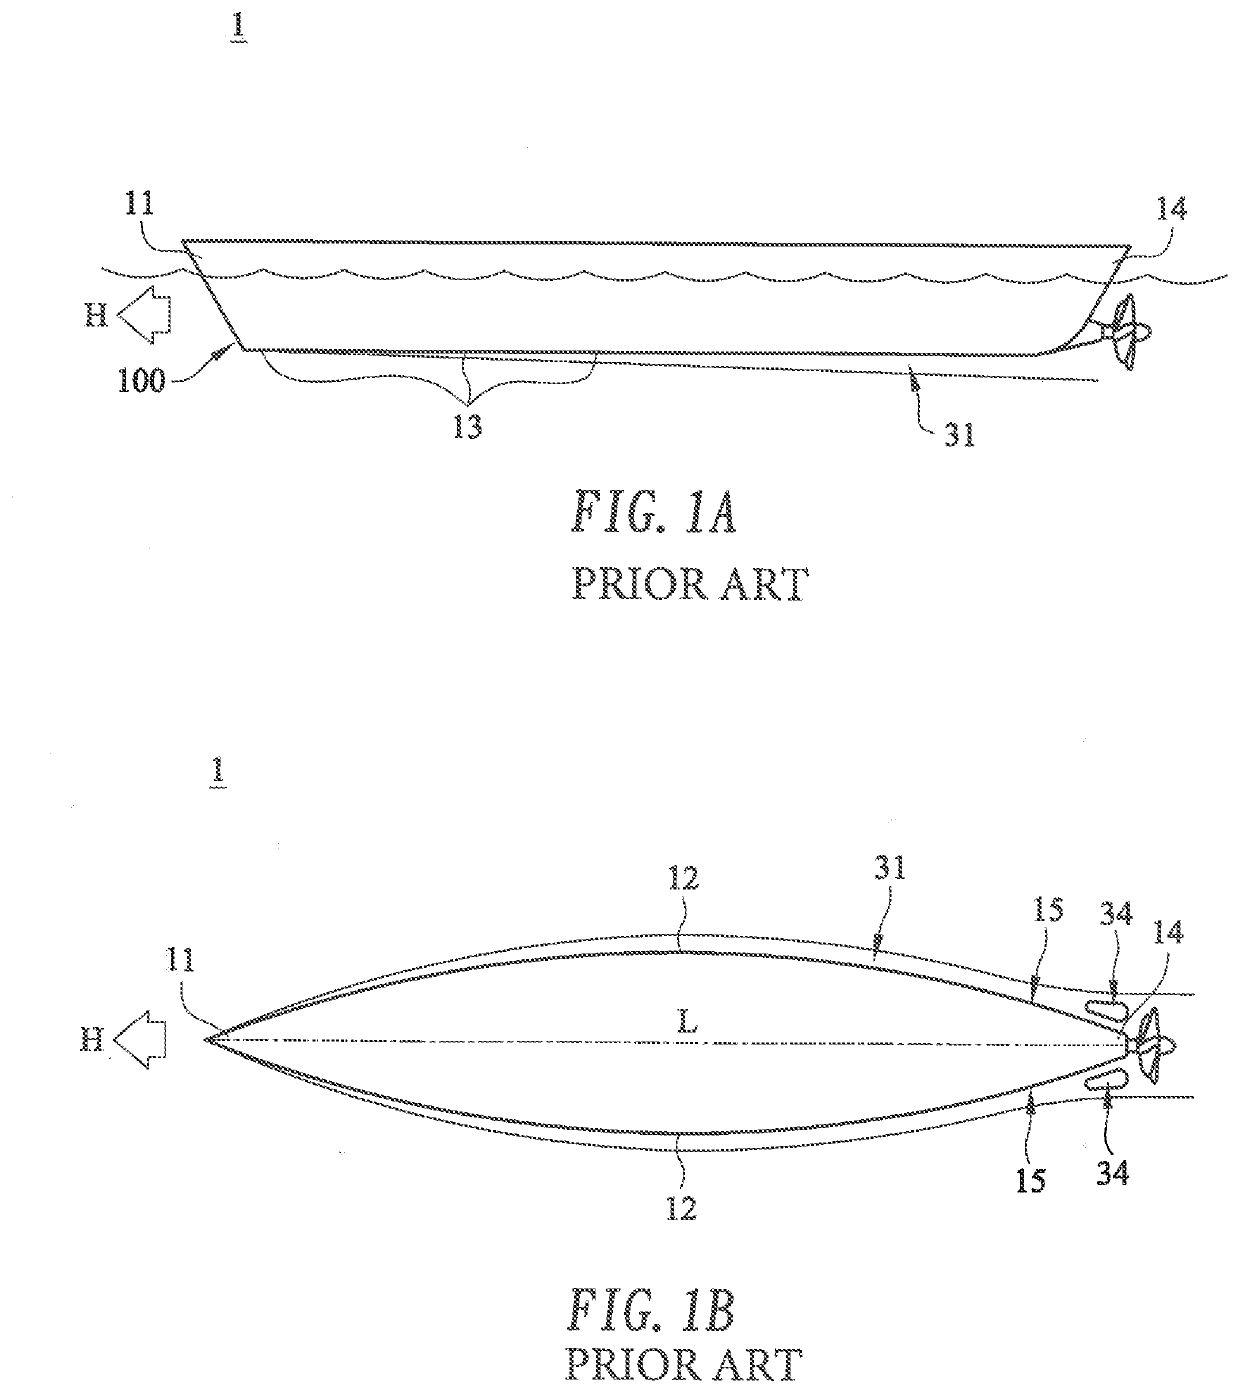 Structure for reducing the drag of a ship and its application